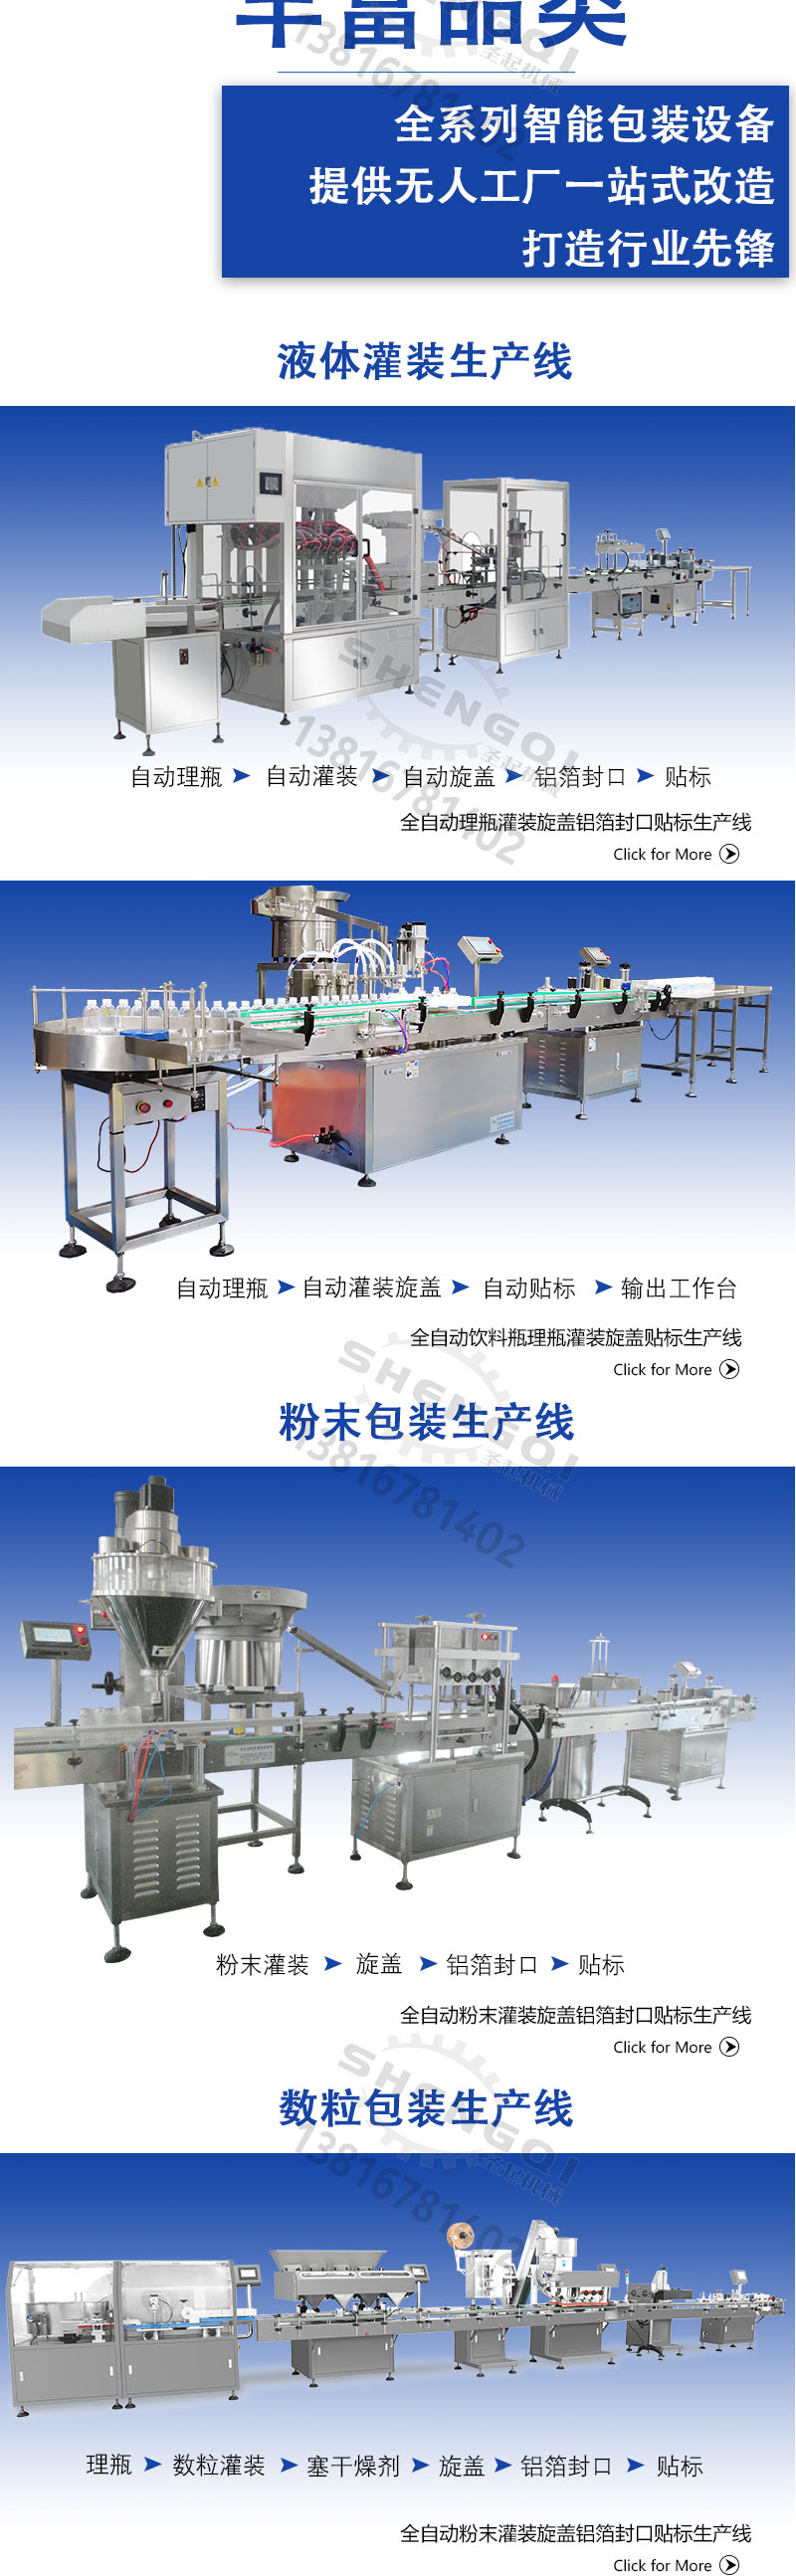 Automatic box filling machine, tissue paper packaging, fully automatic food hot melt adhesive box folding machine, automatic box filling and sealing machine